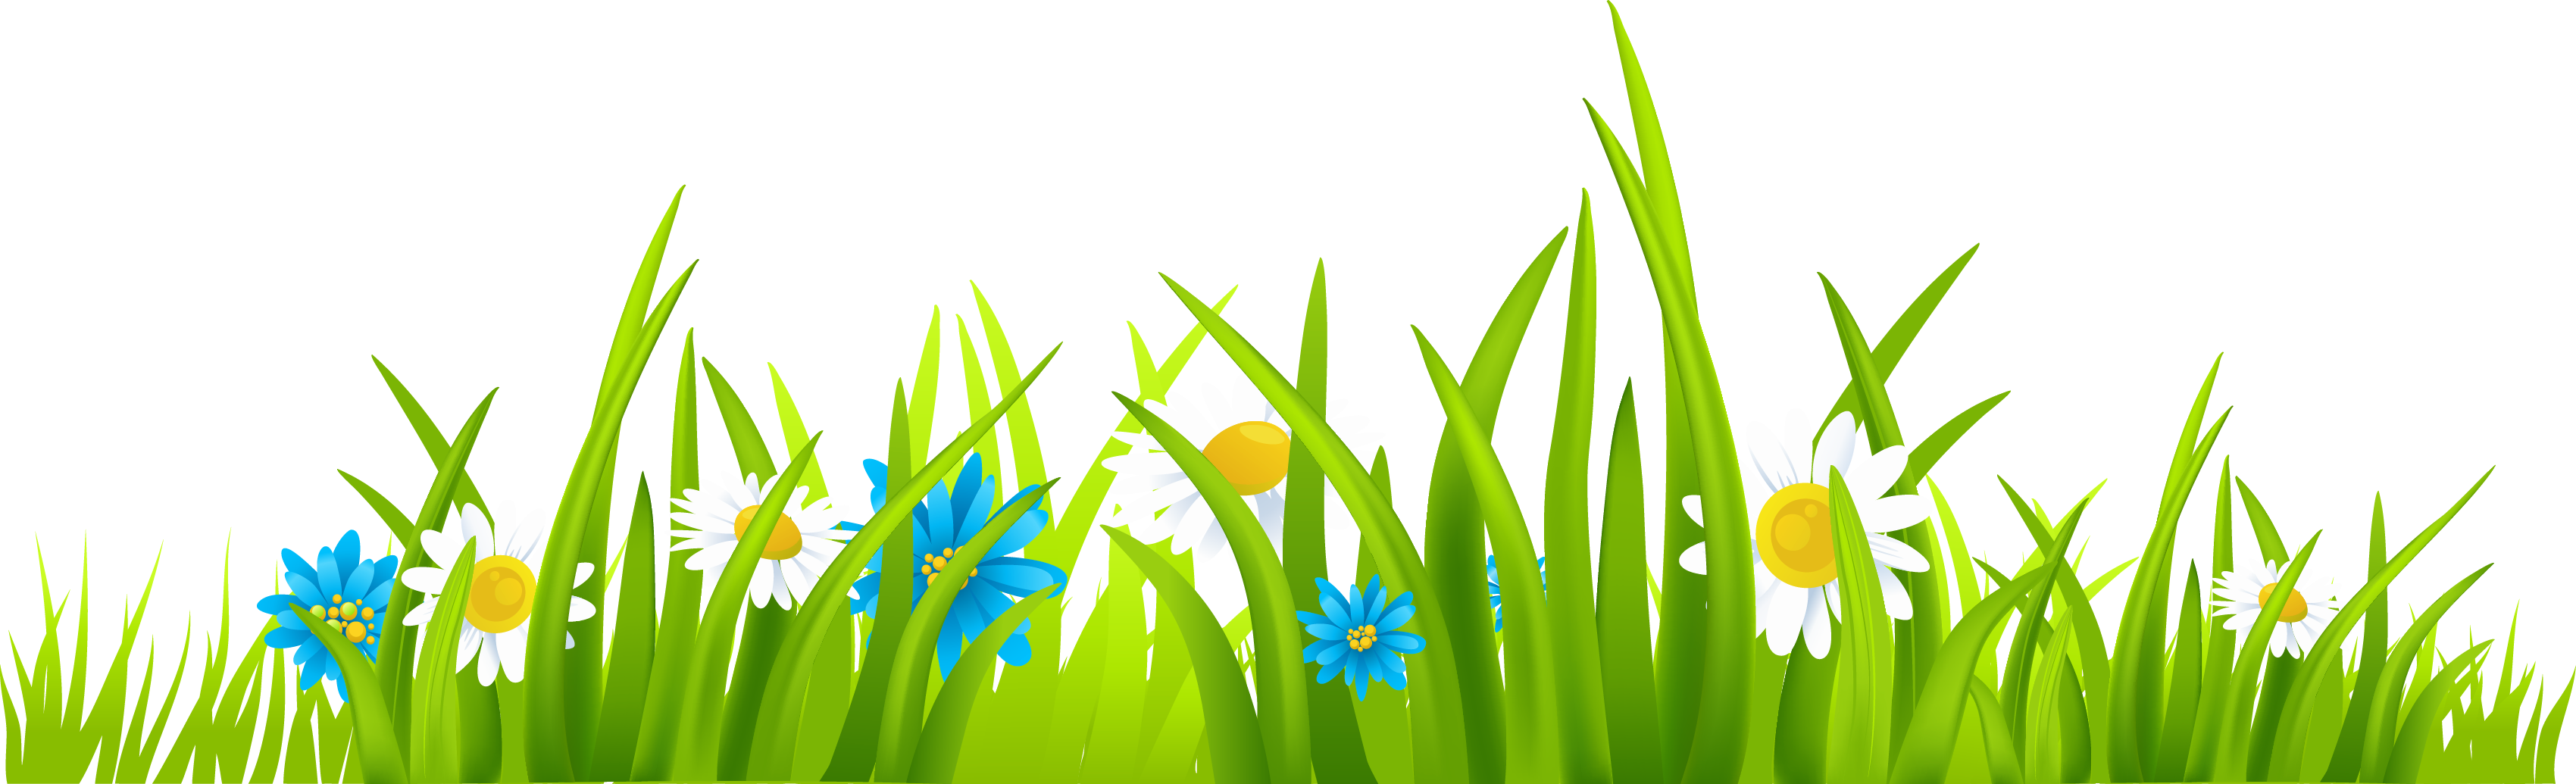 Grass Images Image Png Clipart